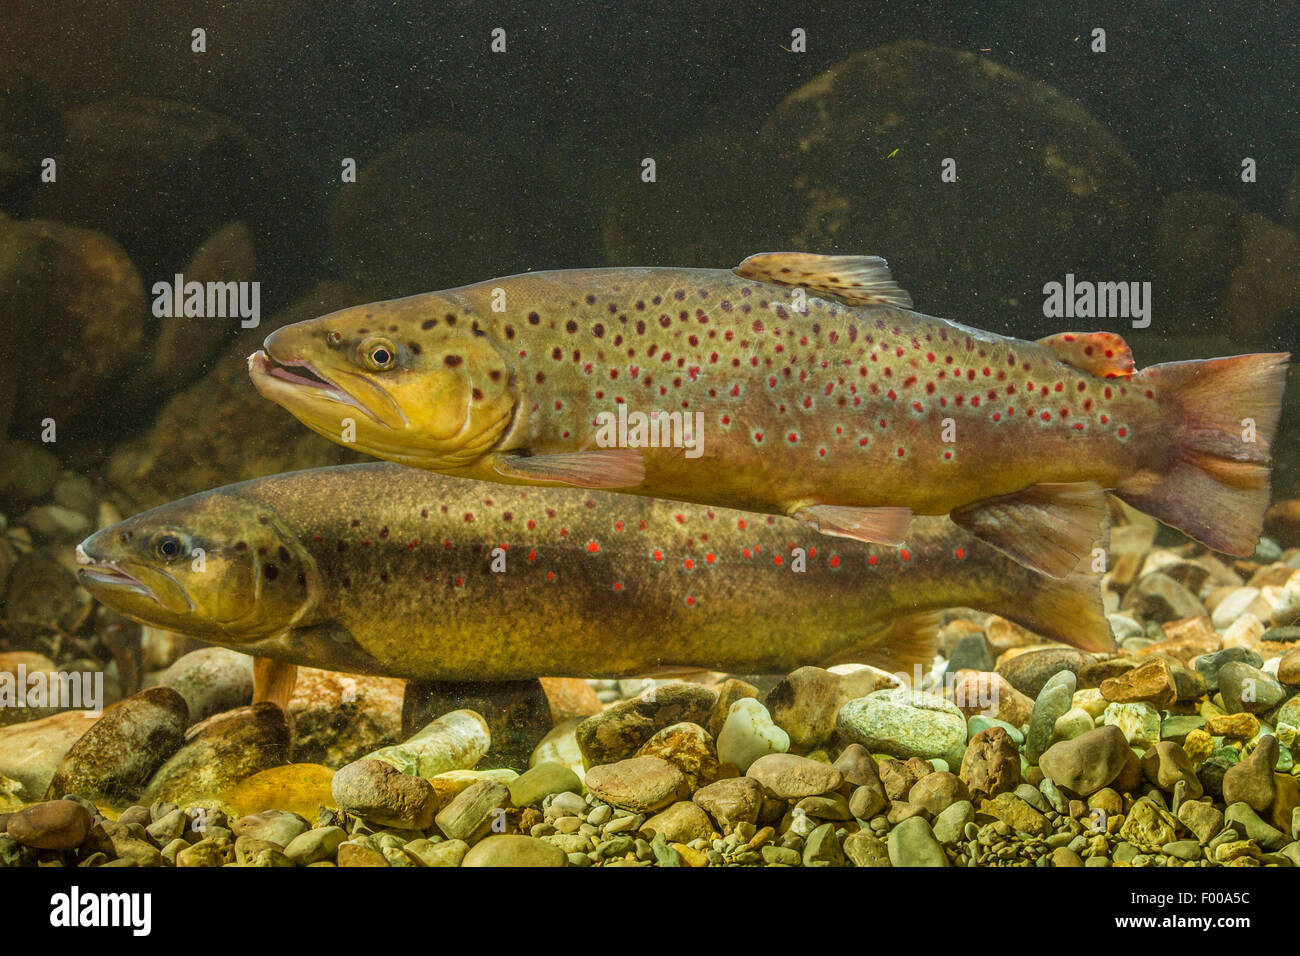 brown trout, river trout, brook trout (Salmo trutta fario), male and female spawning, Germany, Bavaria Stock Photo